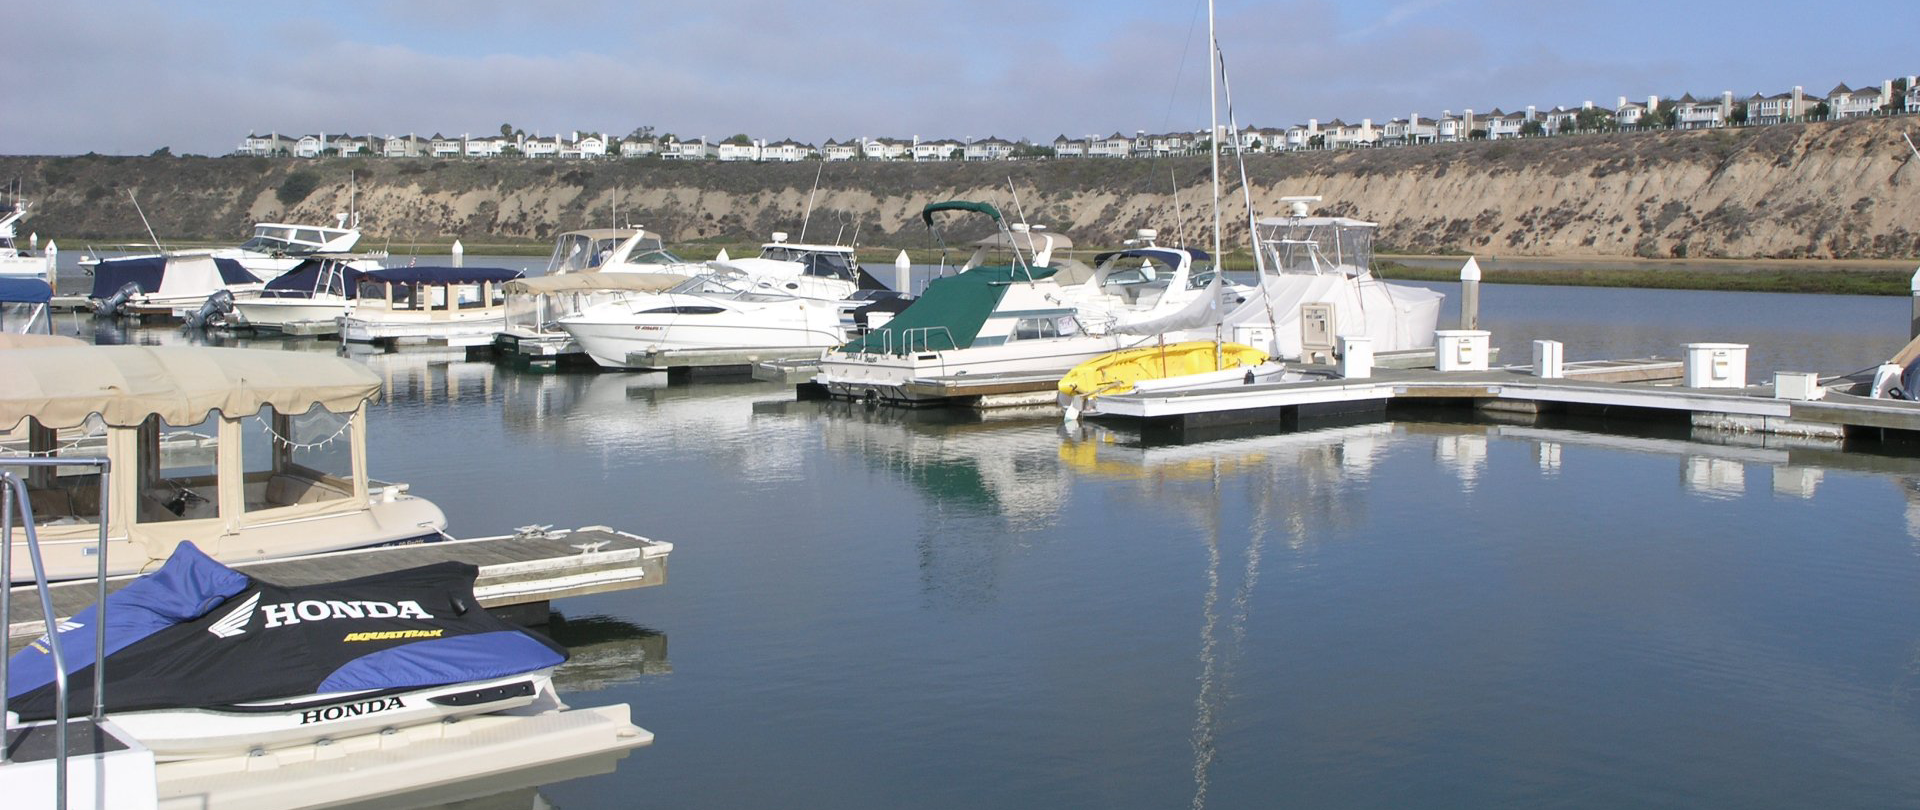 Boats in slips with channel bluffs in background